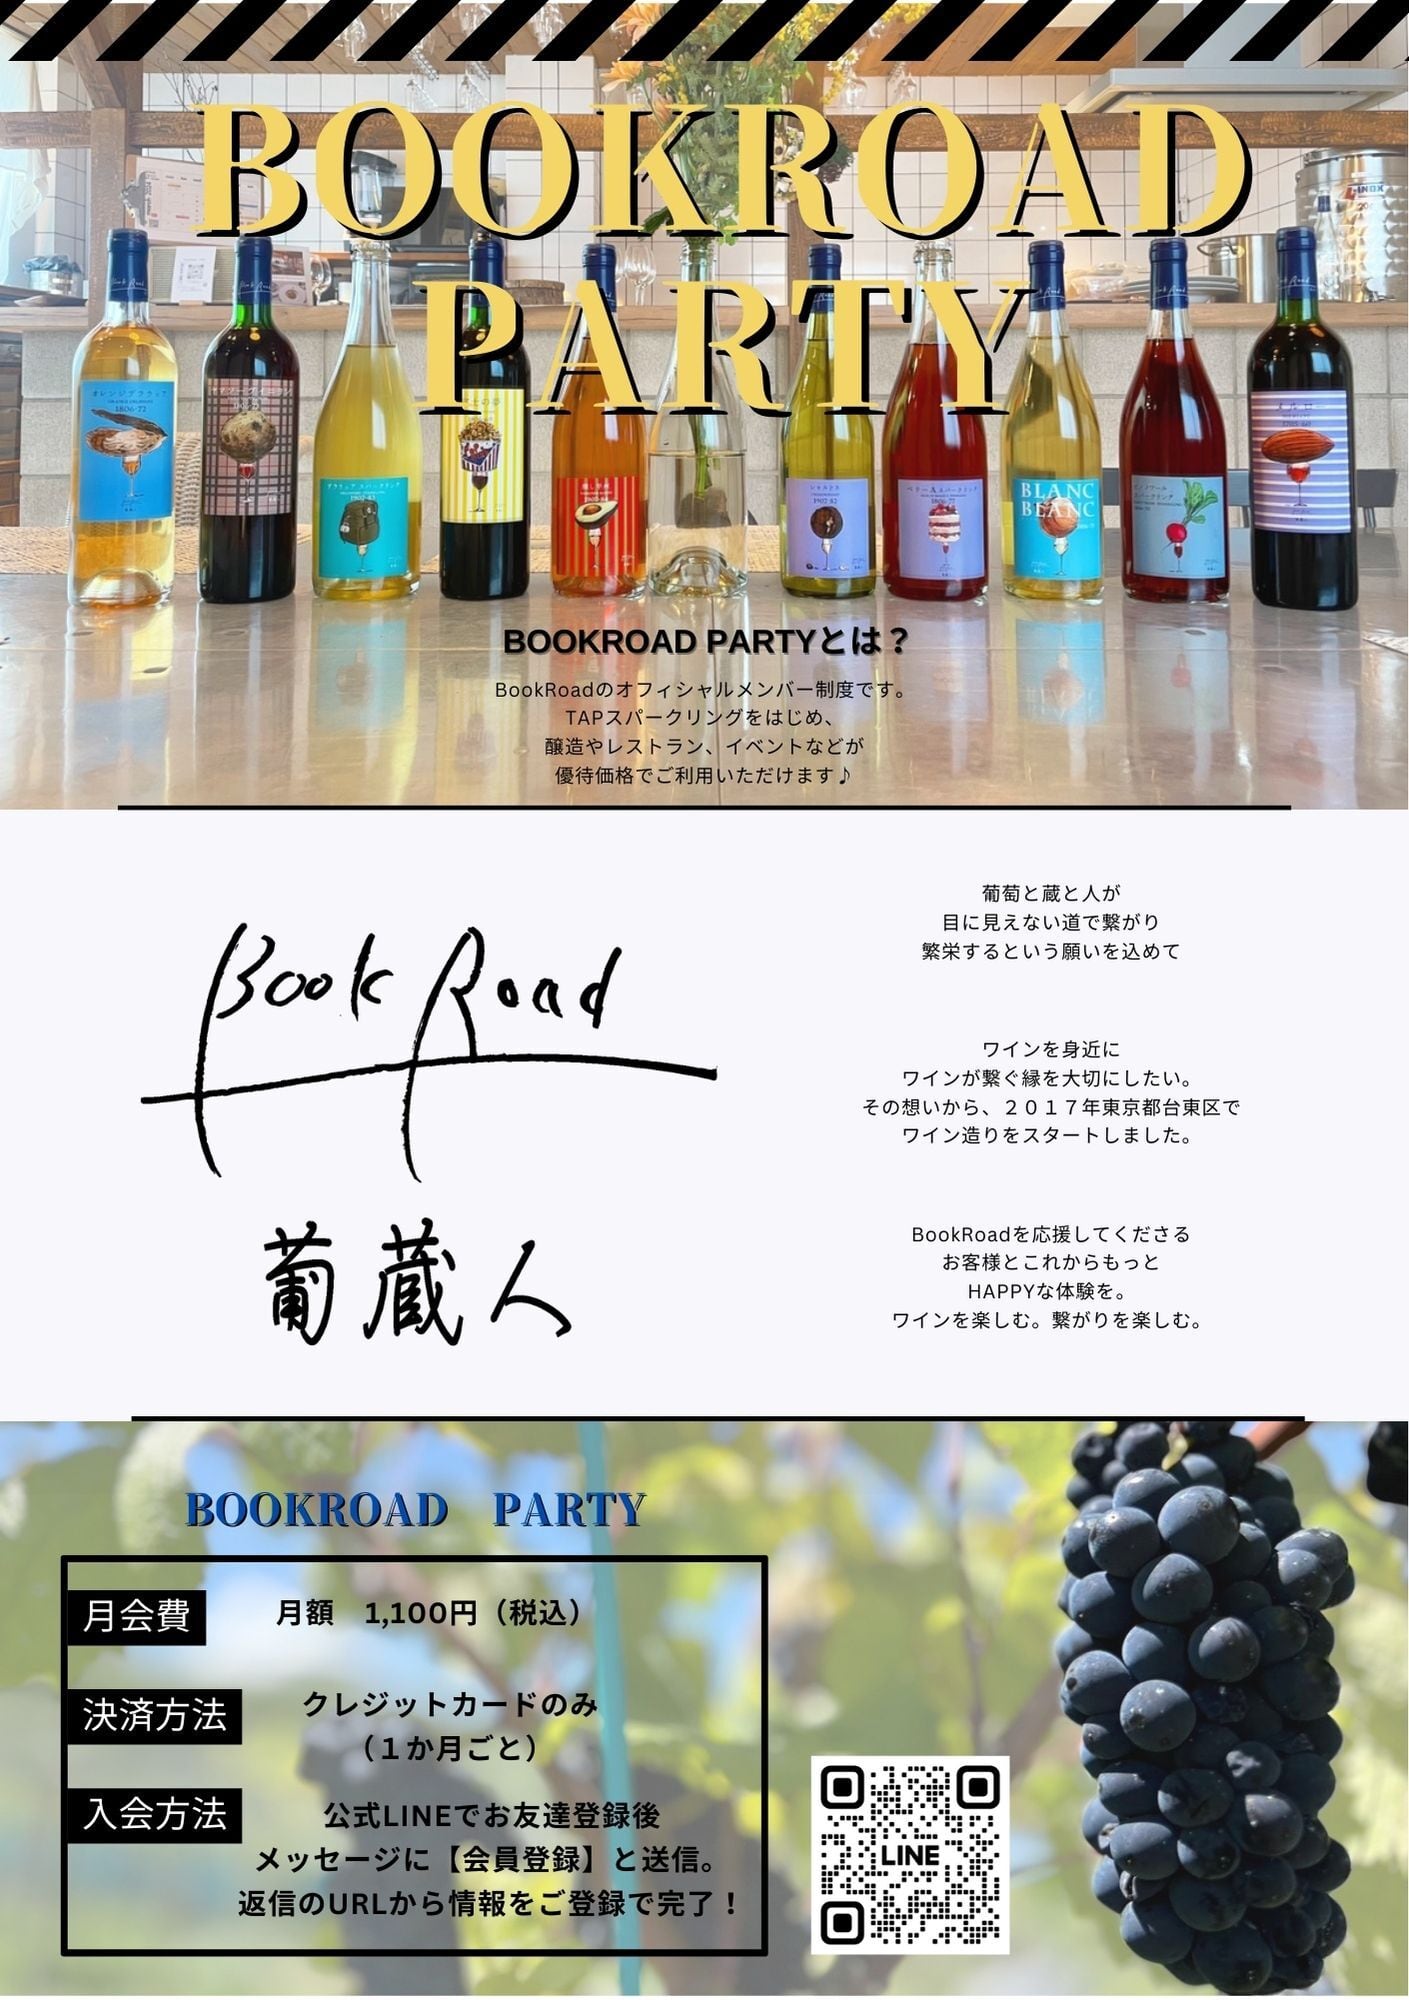 TAP月会員⇒BOOKROAD PARTY会員へ生まれ変わりました👏